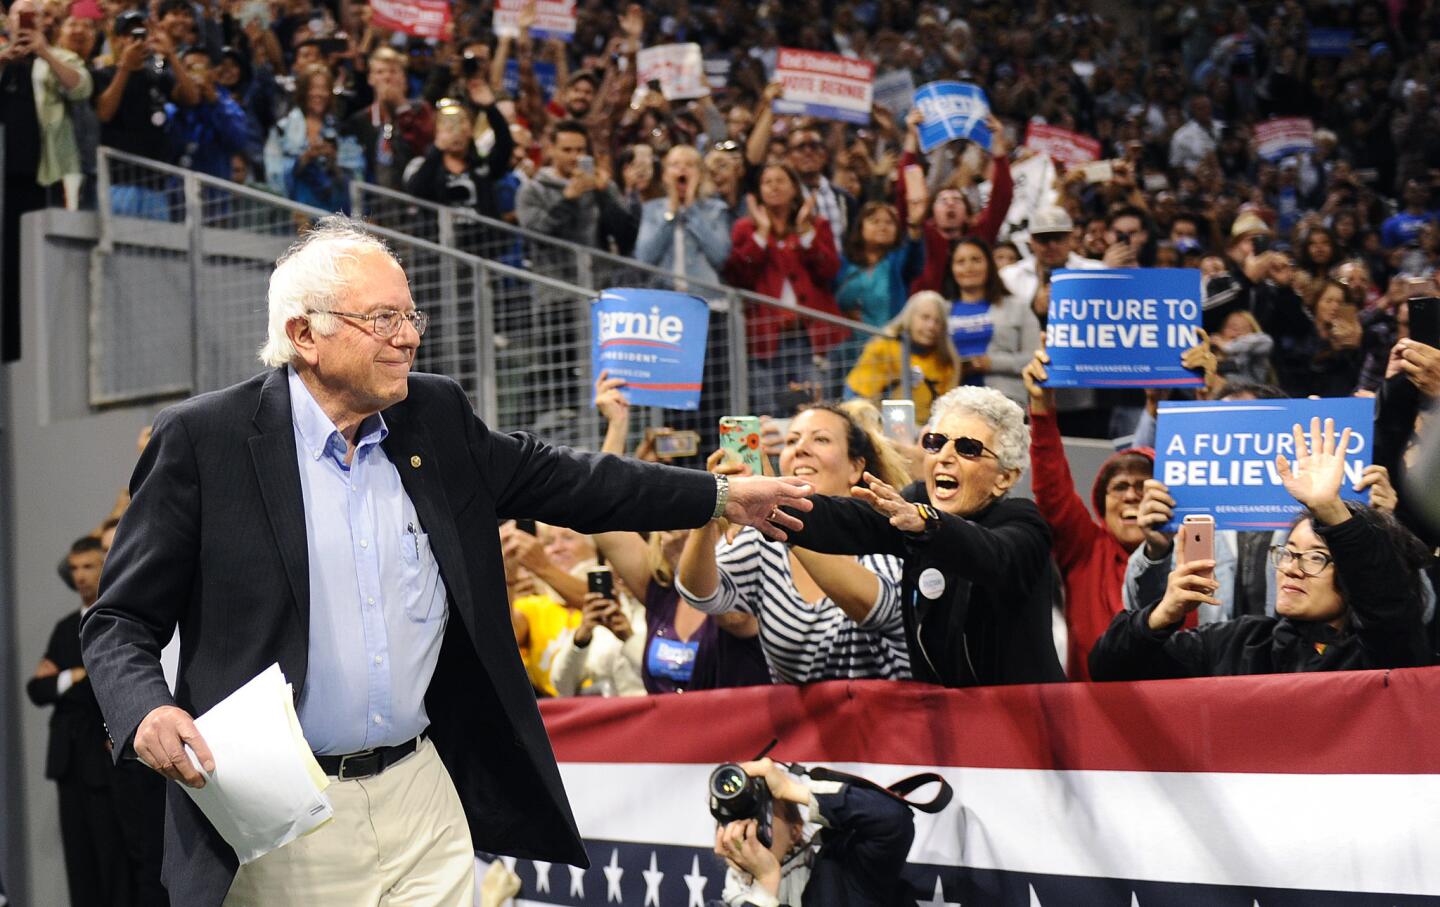 Democratic presidential candidate Bernie Sanders waves to supporters Tuesday night at StubHub Center in Carson, Calif.